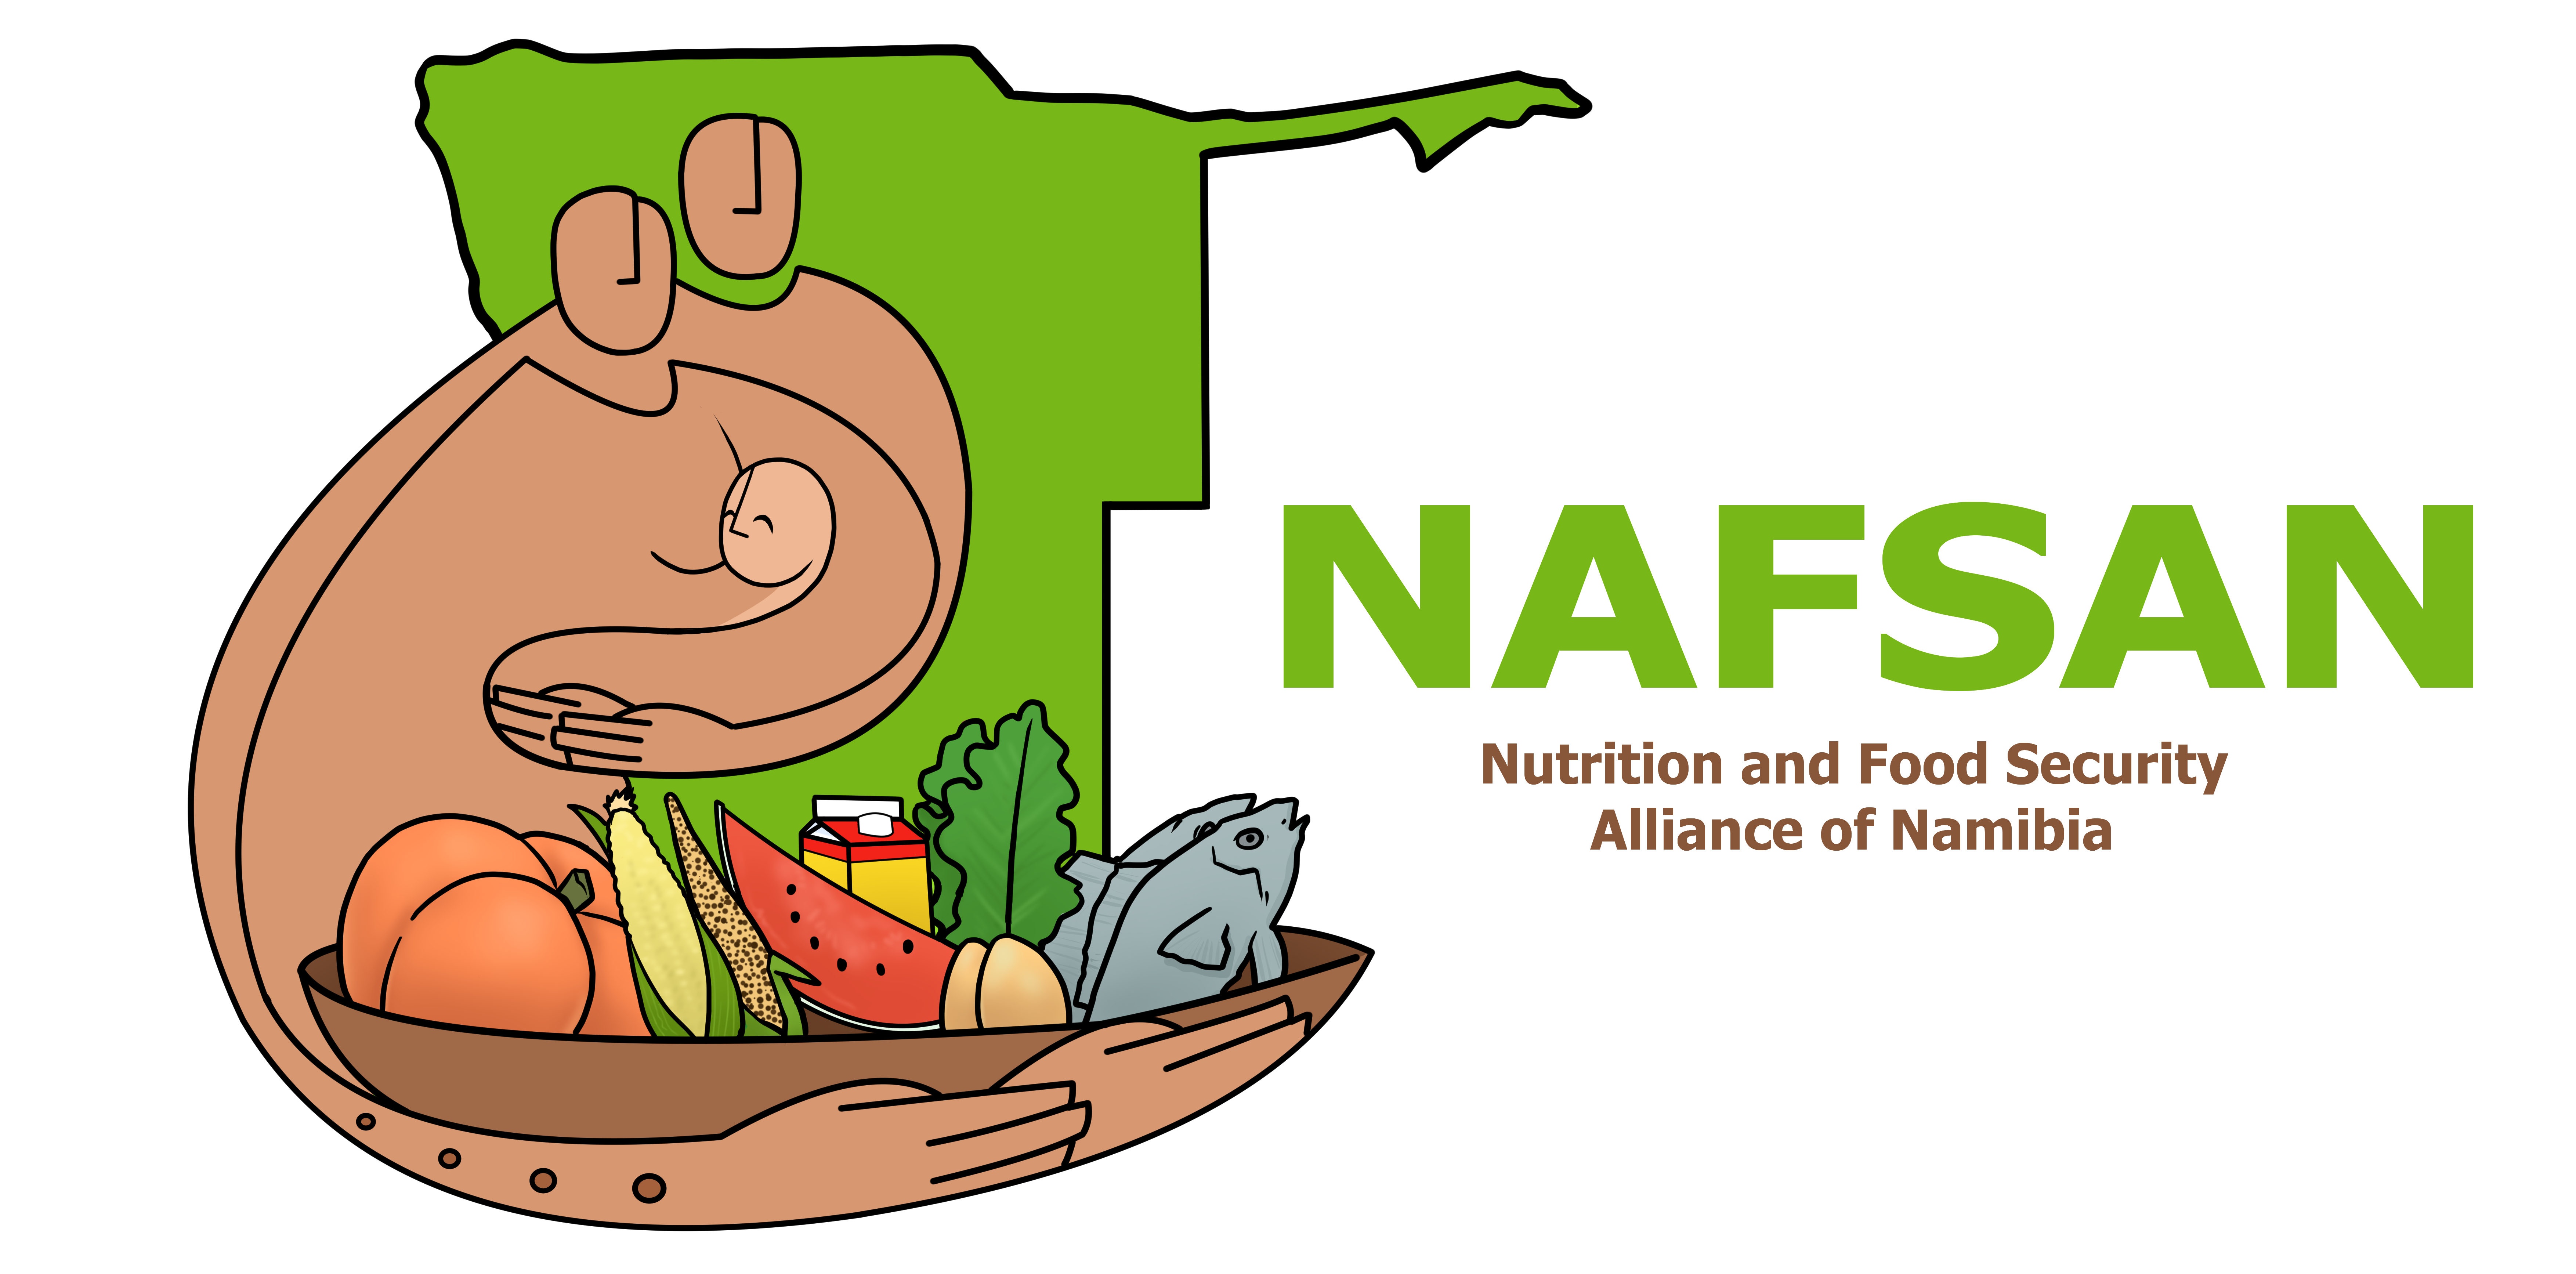 Nutrition and Food Security Alliance of Namibia